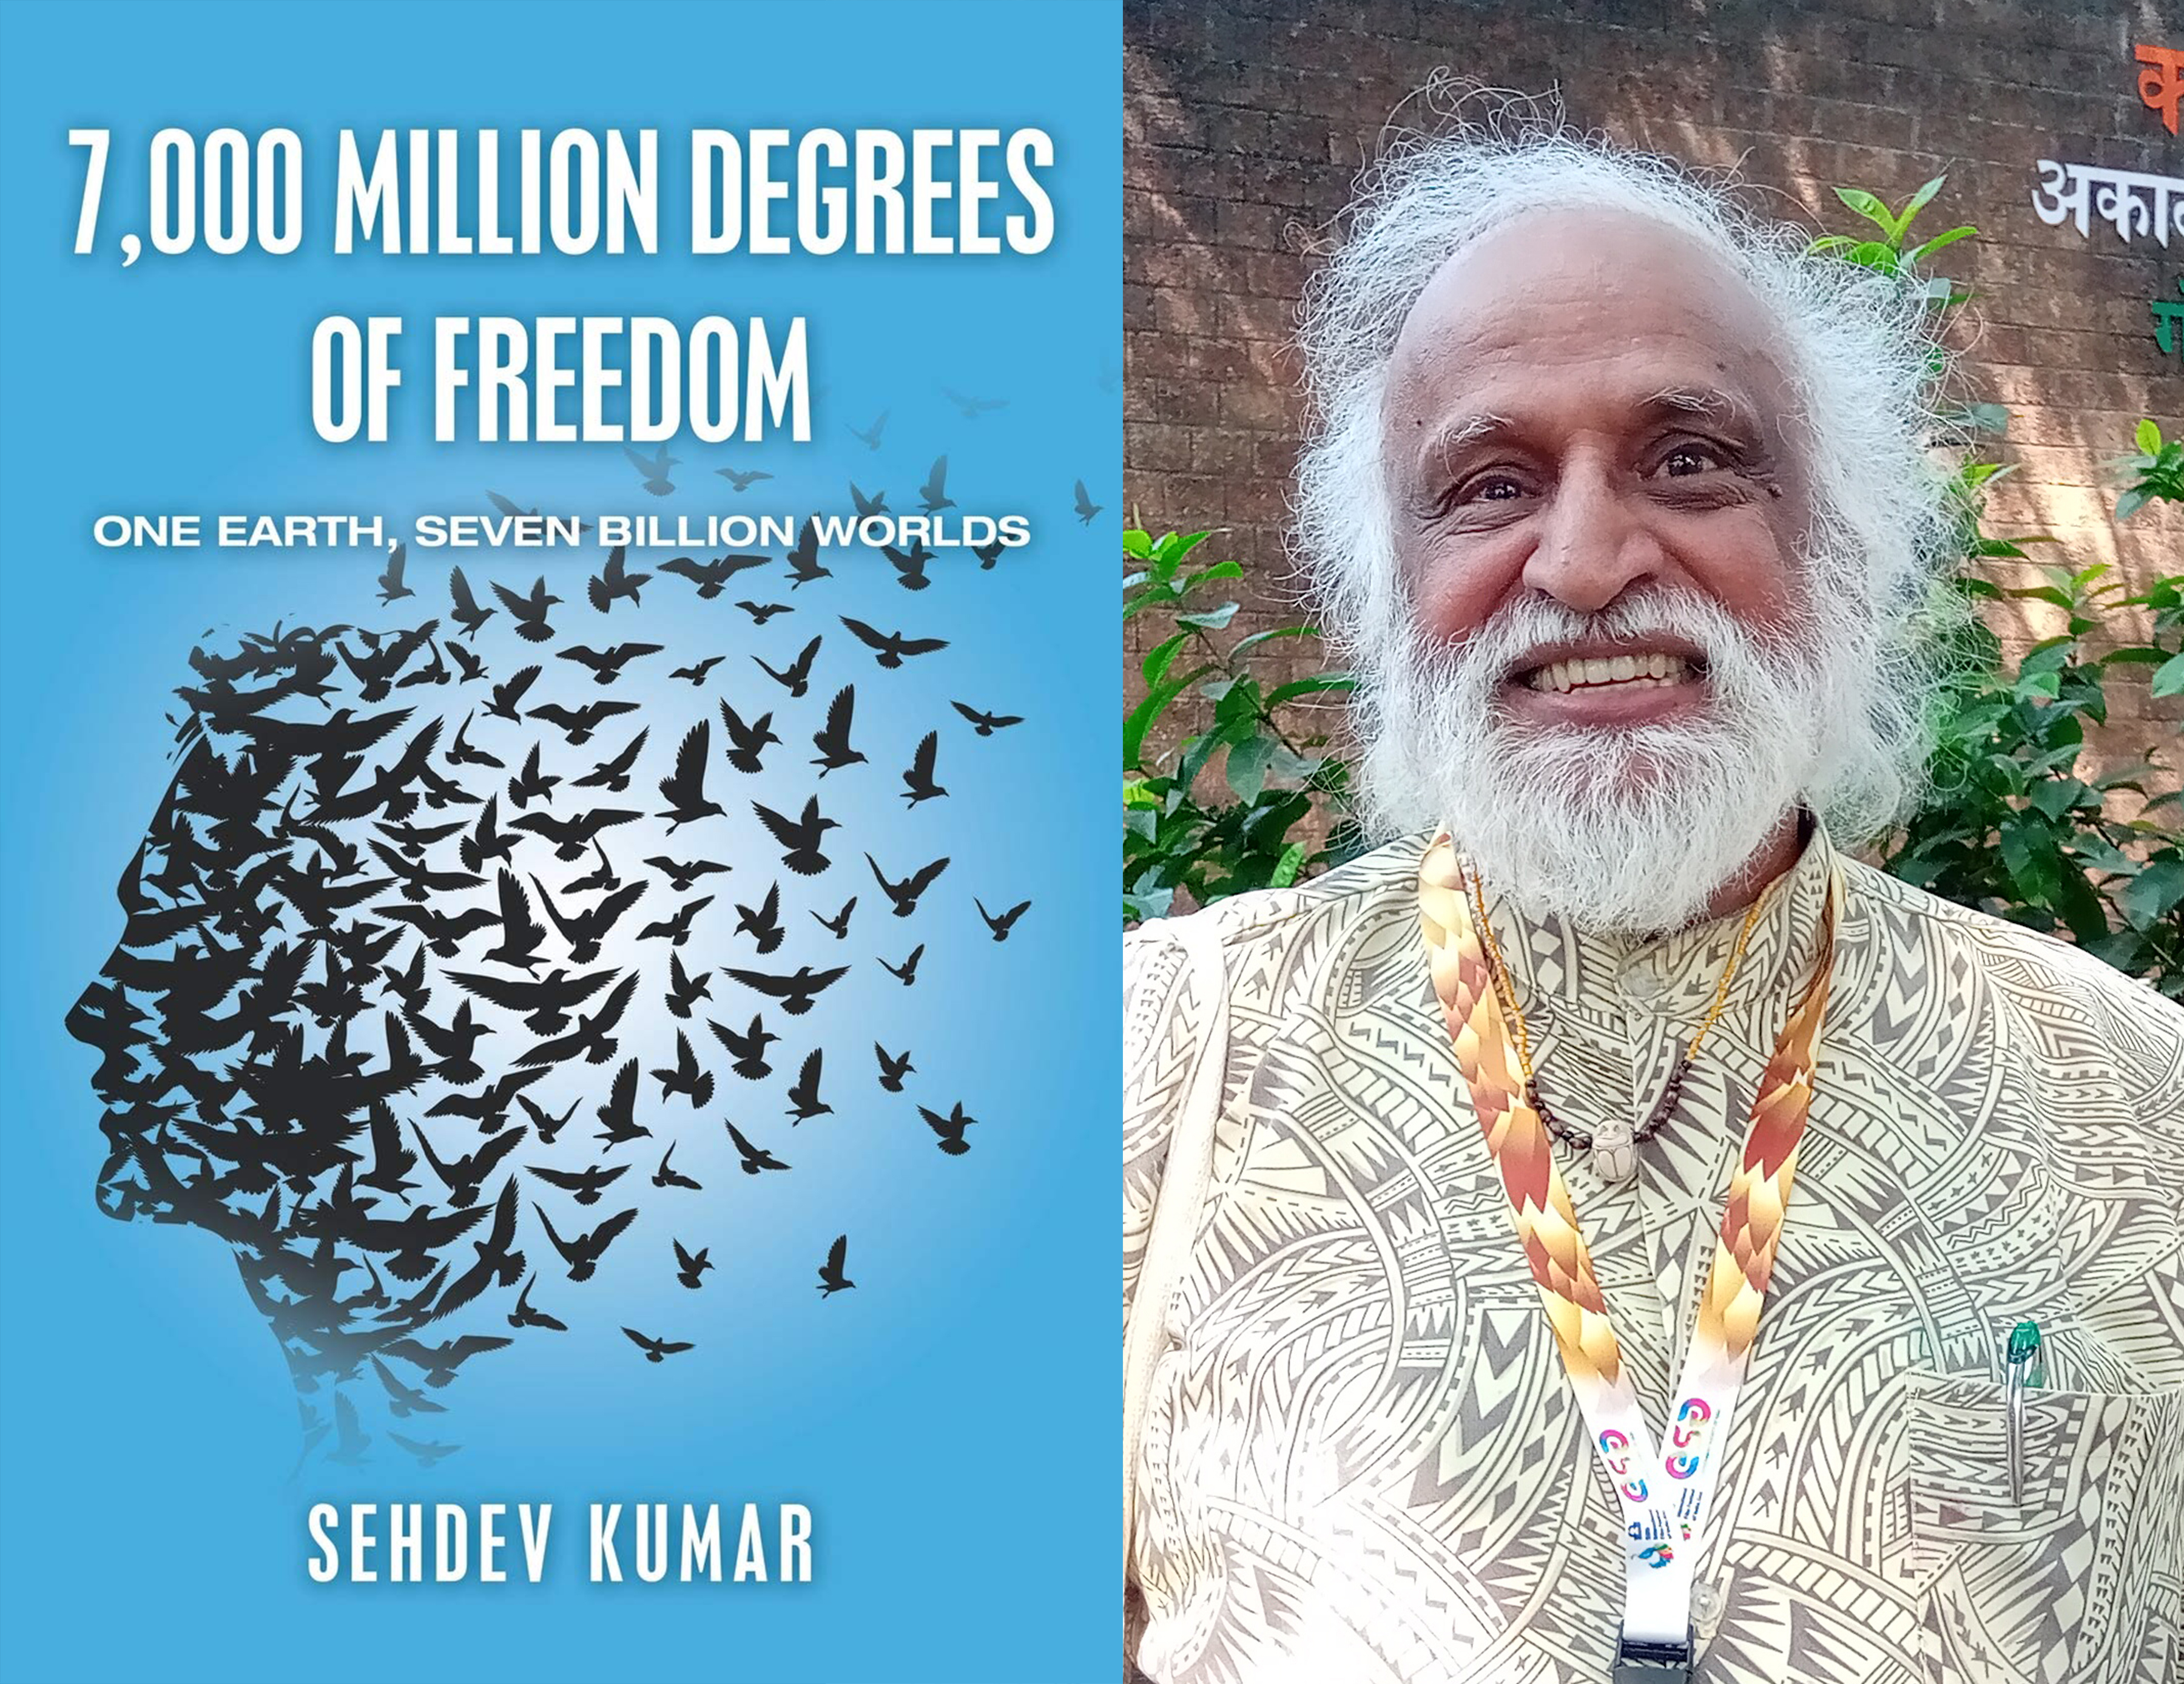 Prof. Sehdev Kumar Launches Book, "7,000 Million Degrees of Freedom: One Earth, Seven Billion Worlds."